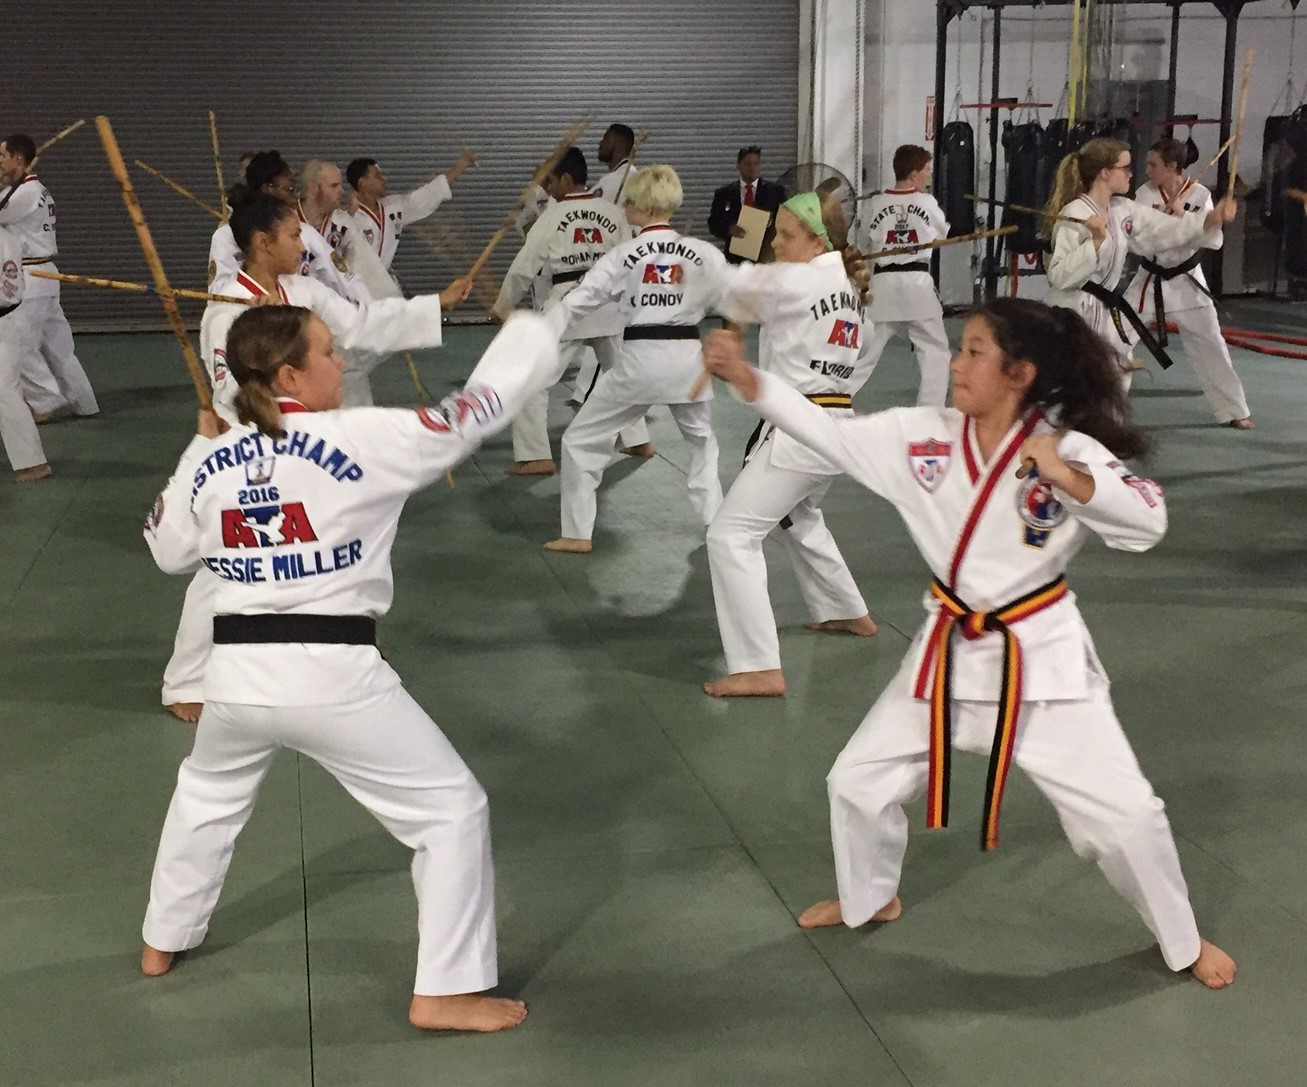 Jessie Miller (left) and Lilly Sonn work on their karate moves.